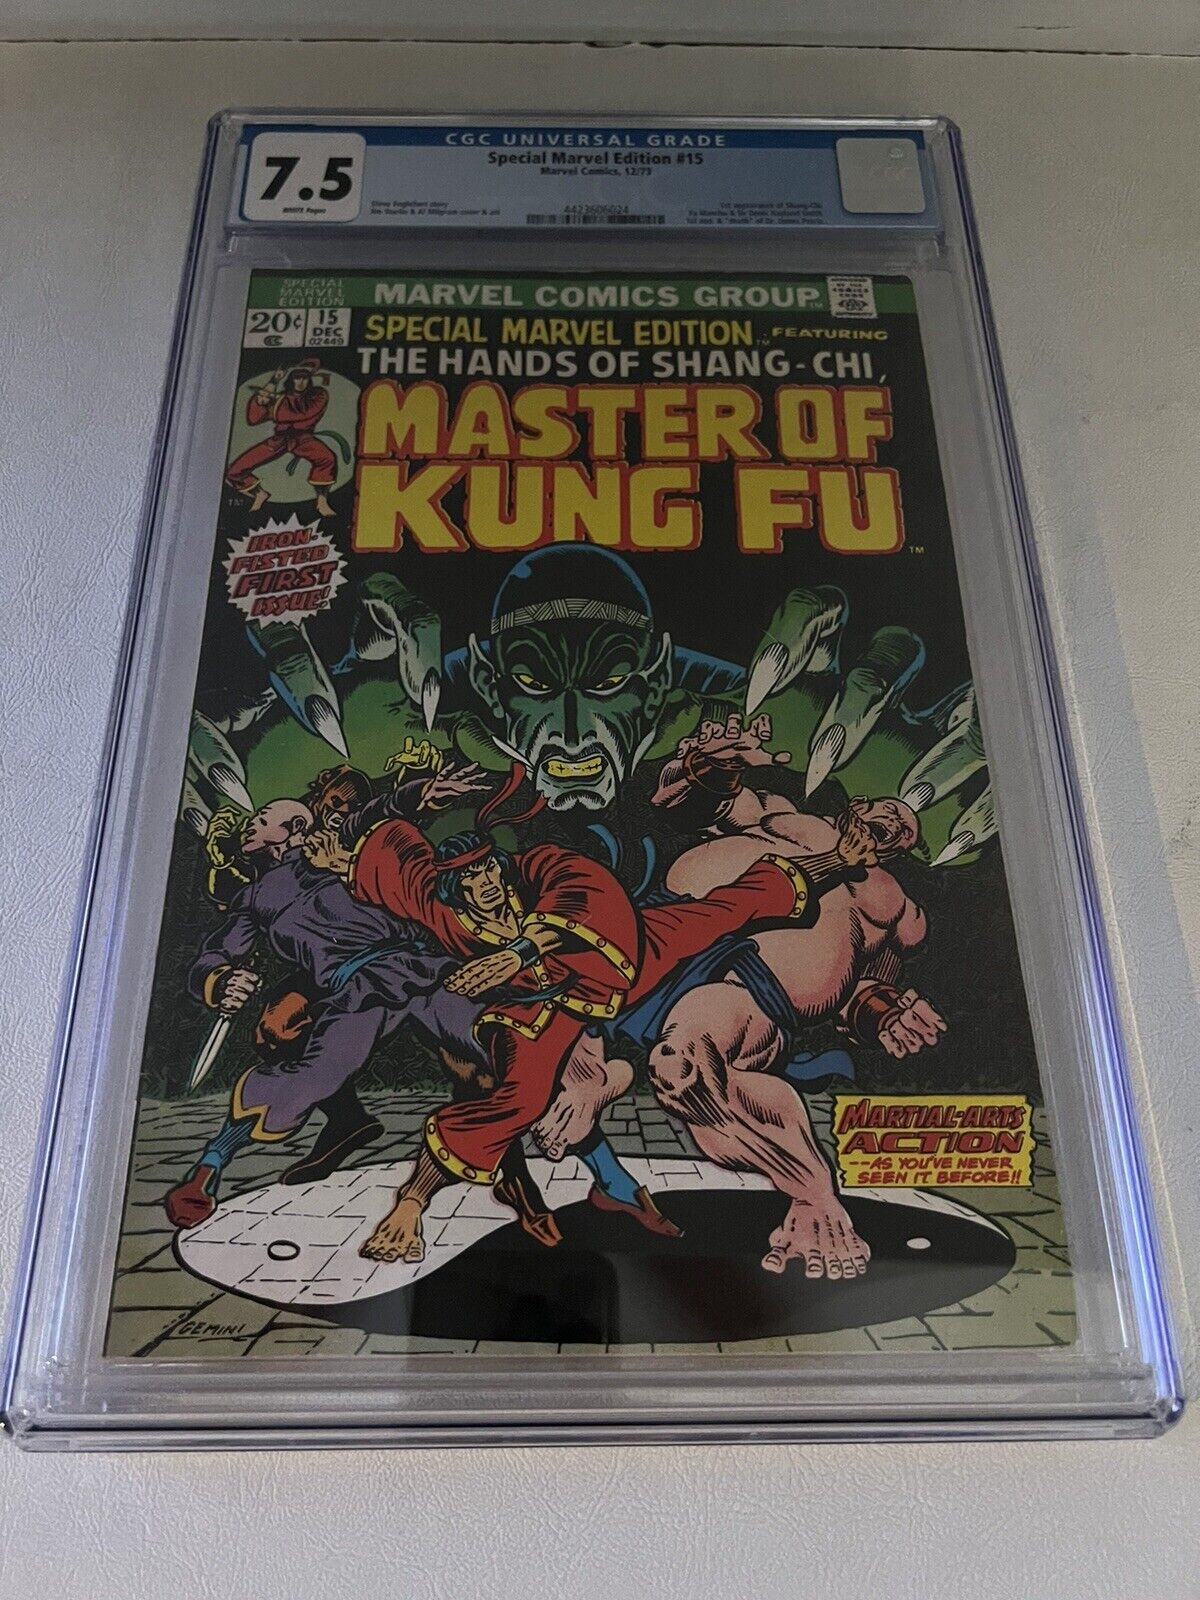 1973 Special Marvel Edition 15 CGC 7.5 1st Appearance of Shang-Chi.